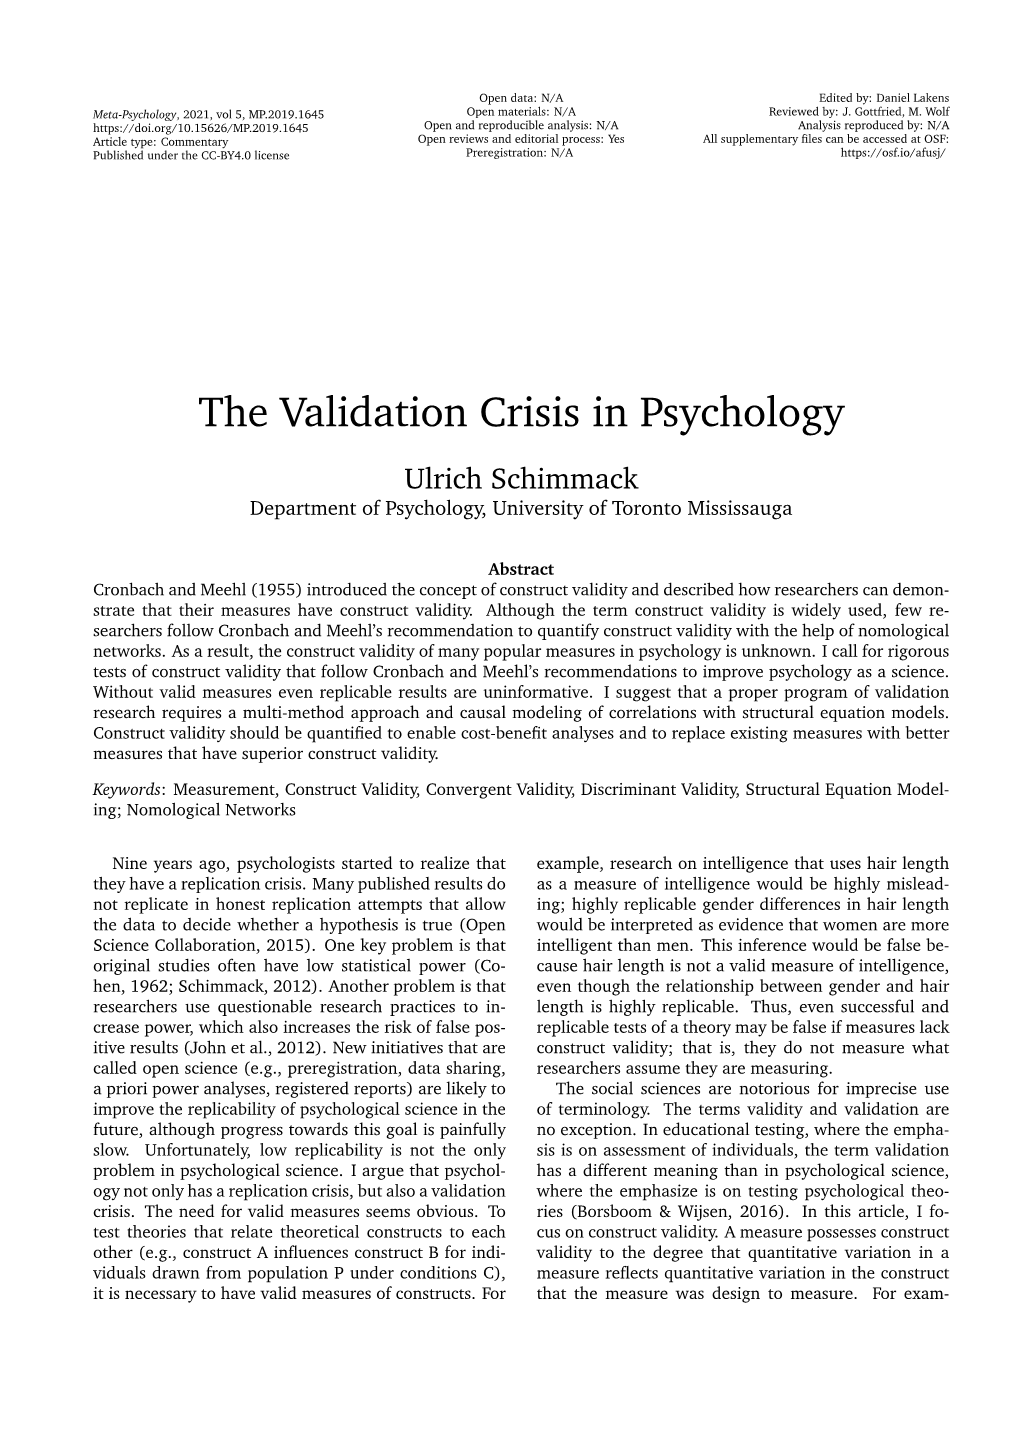 The Validation Crisis in Psychology